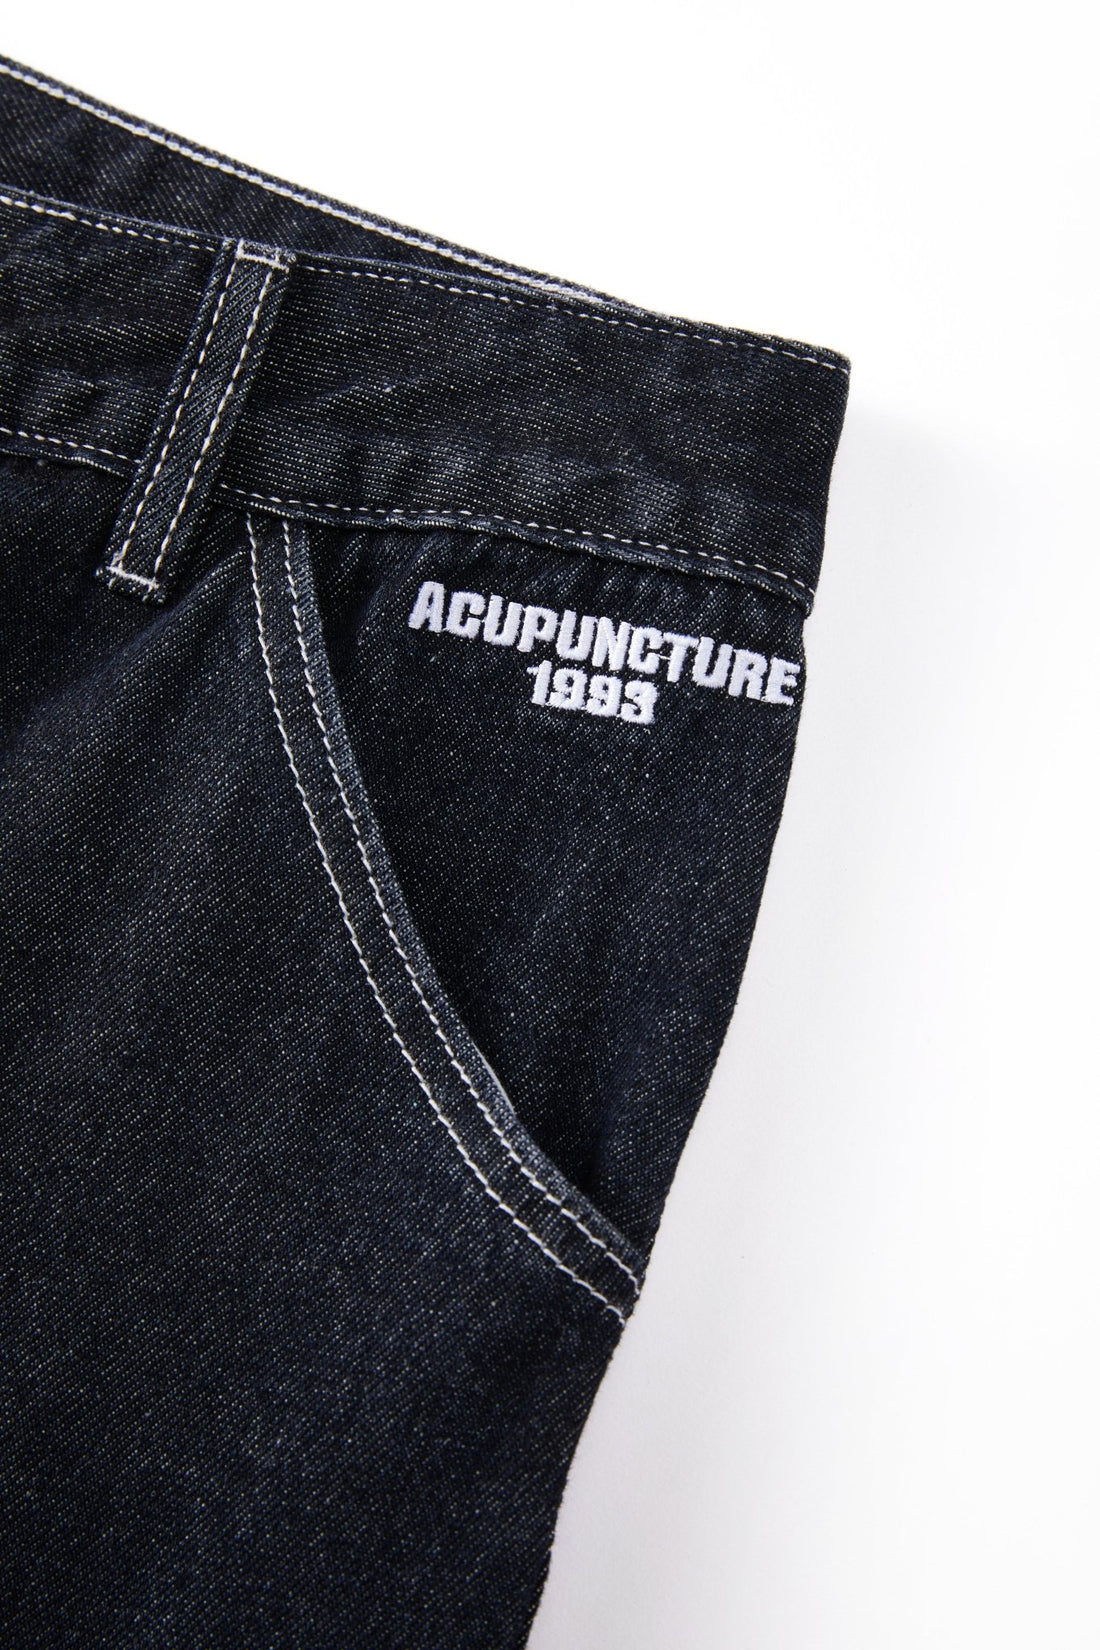 LINED JEANS BLACK Acupuncture